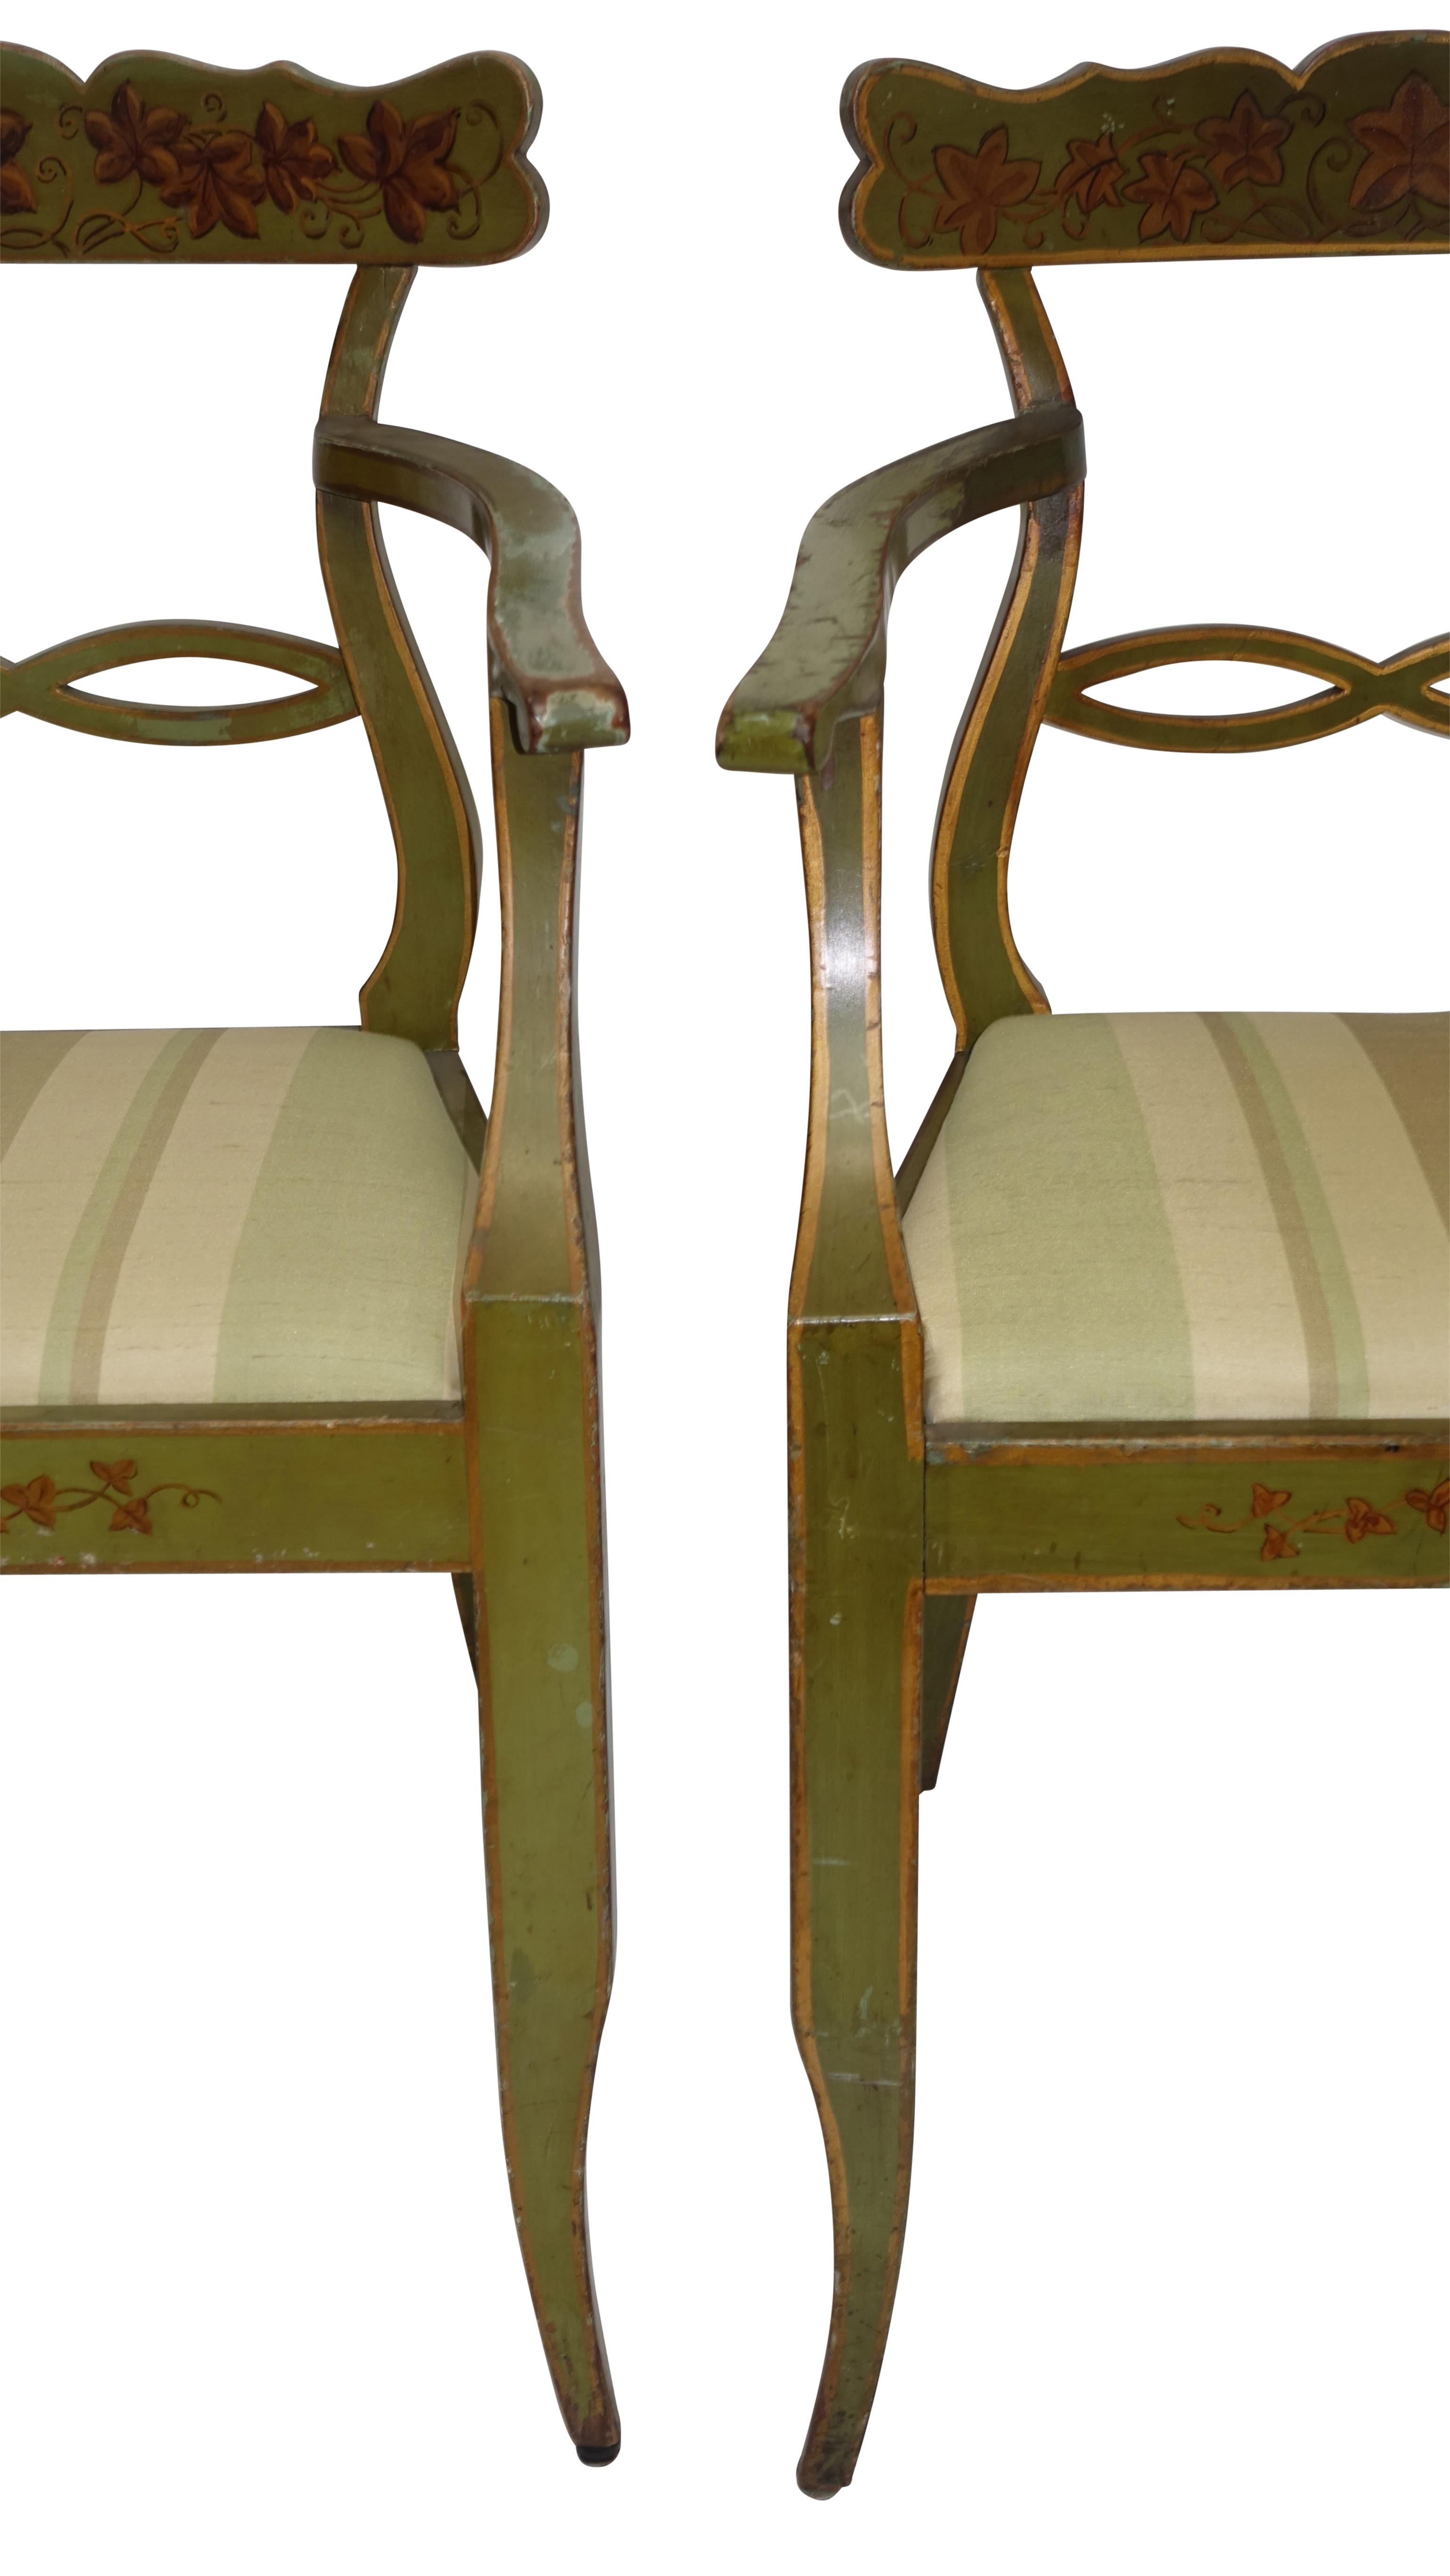 Four Green Painted Armchairs with Trailing Ivy, Northern European, 19th Century For Sale 6